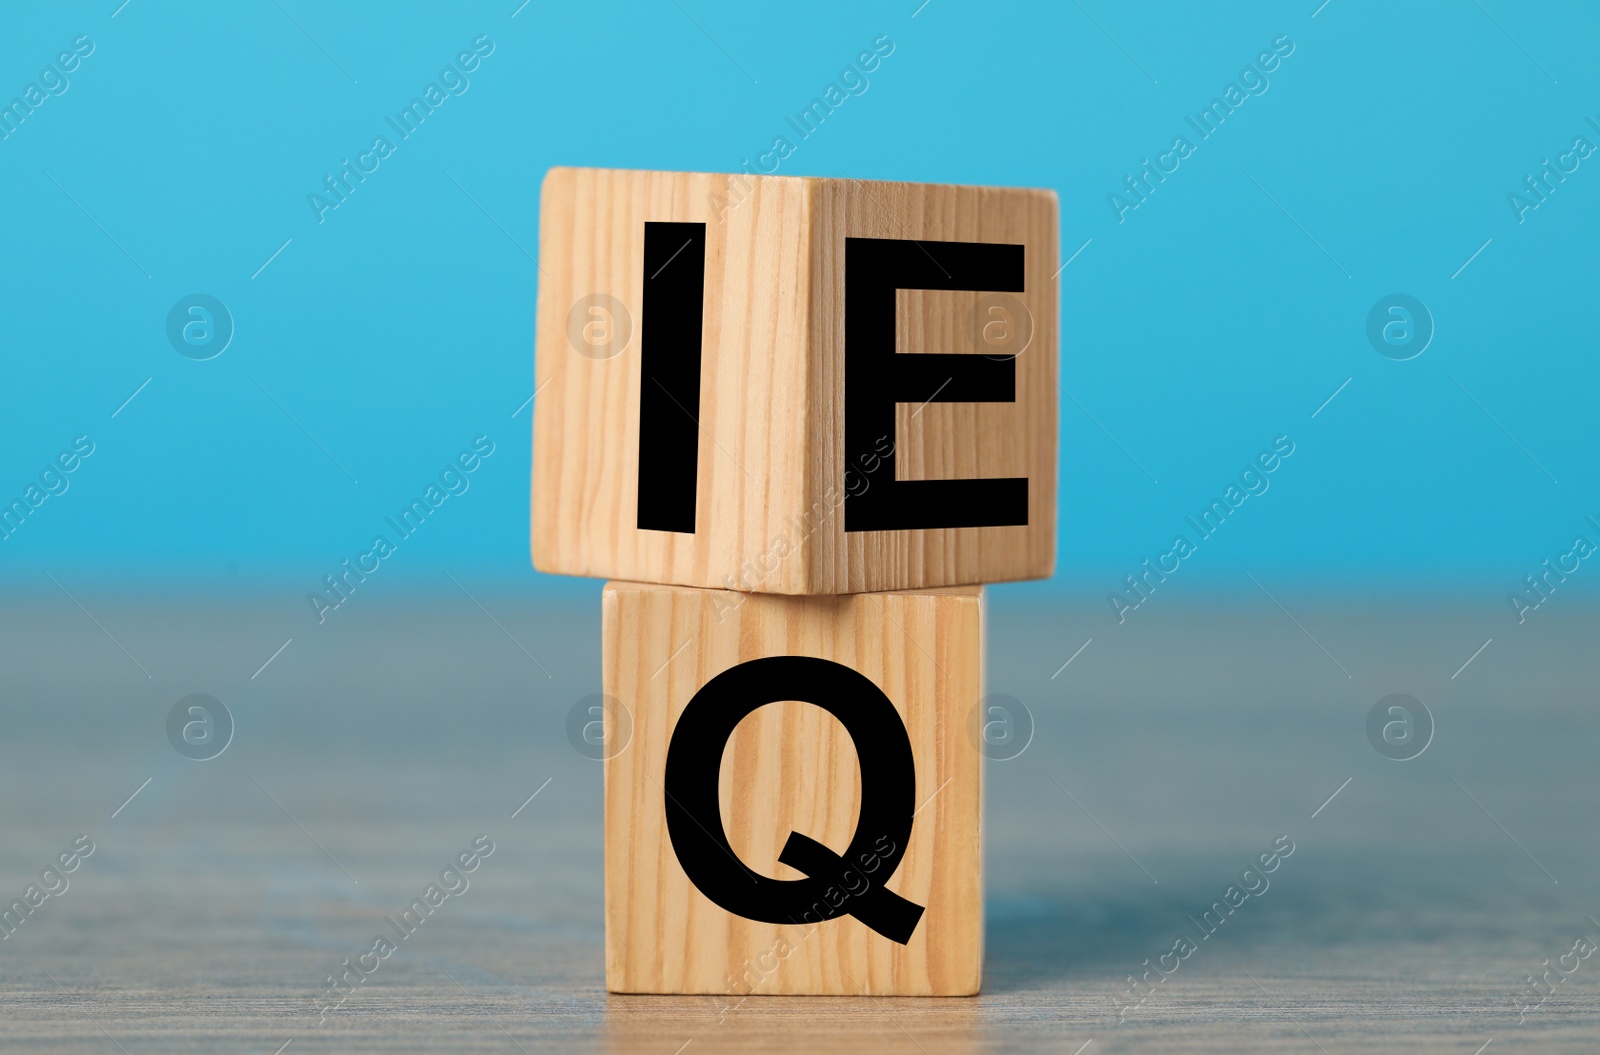 Photo of Wooden cubes with letters E, I and Q on table